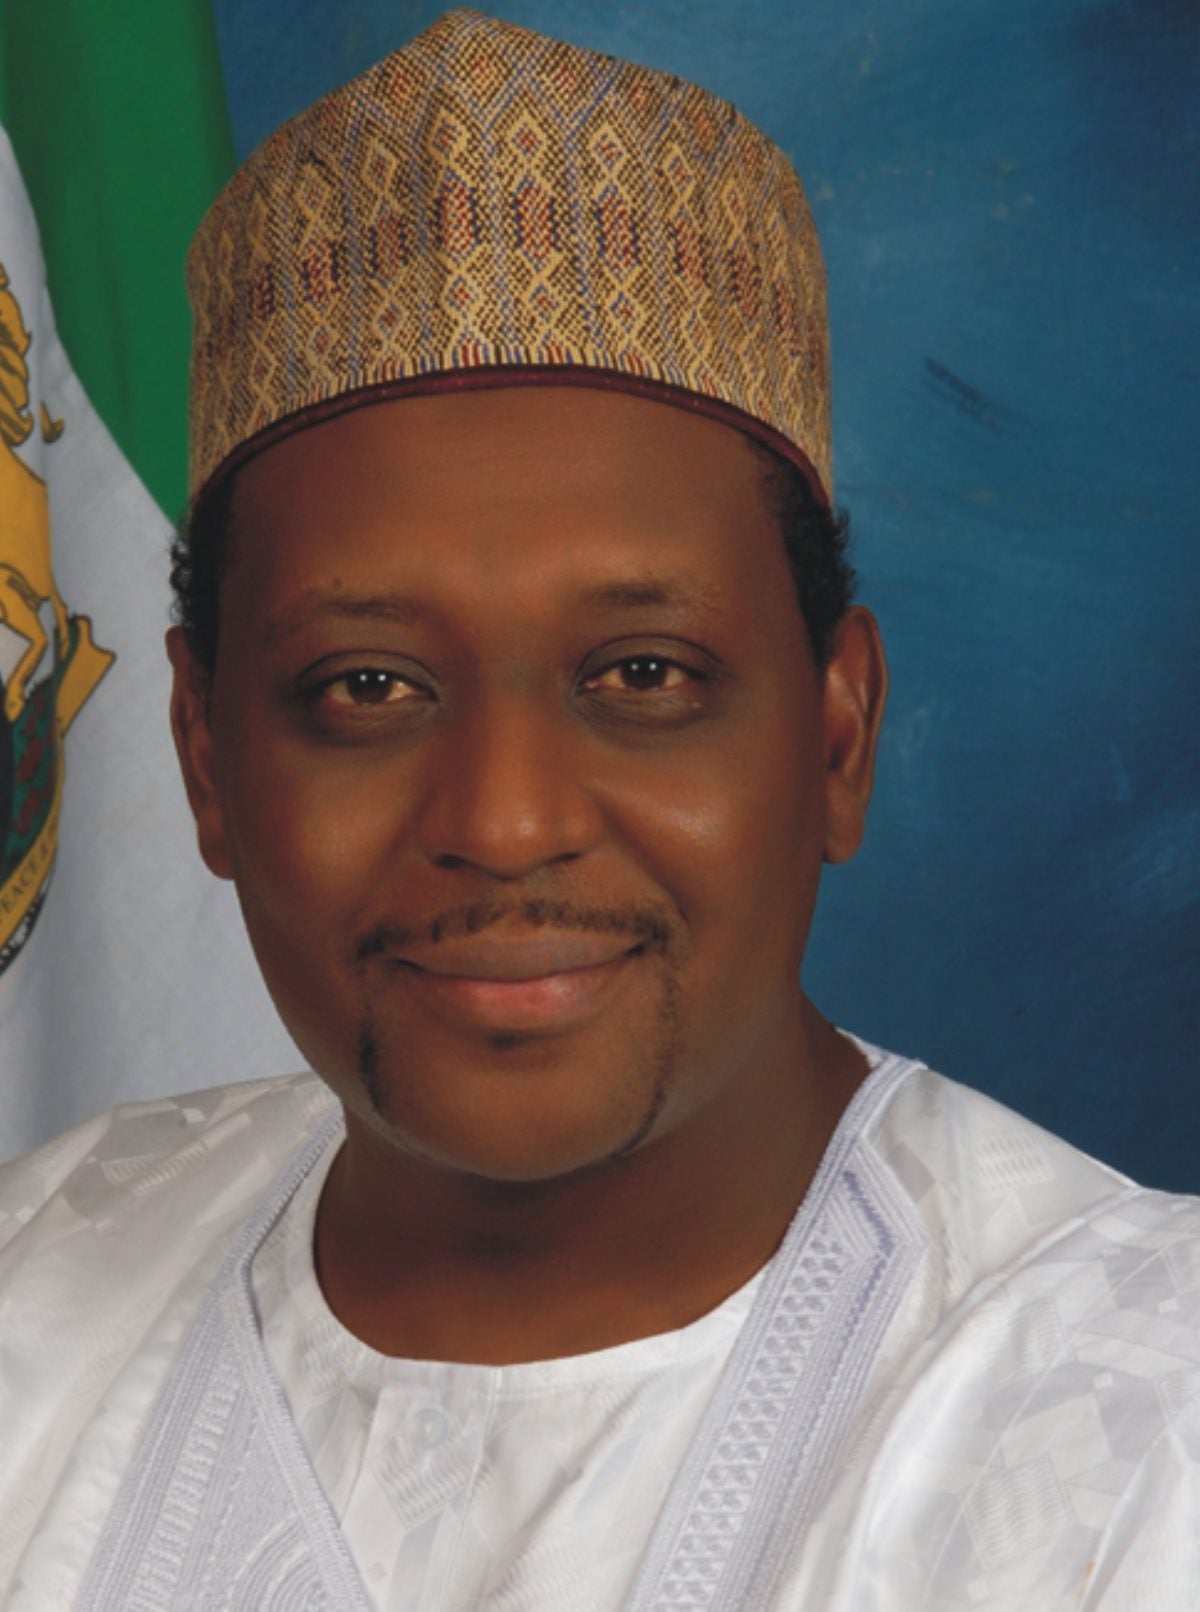 Muhammad Pate, Former Minister of State for Health of Nigeria